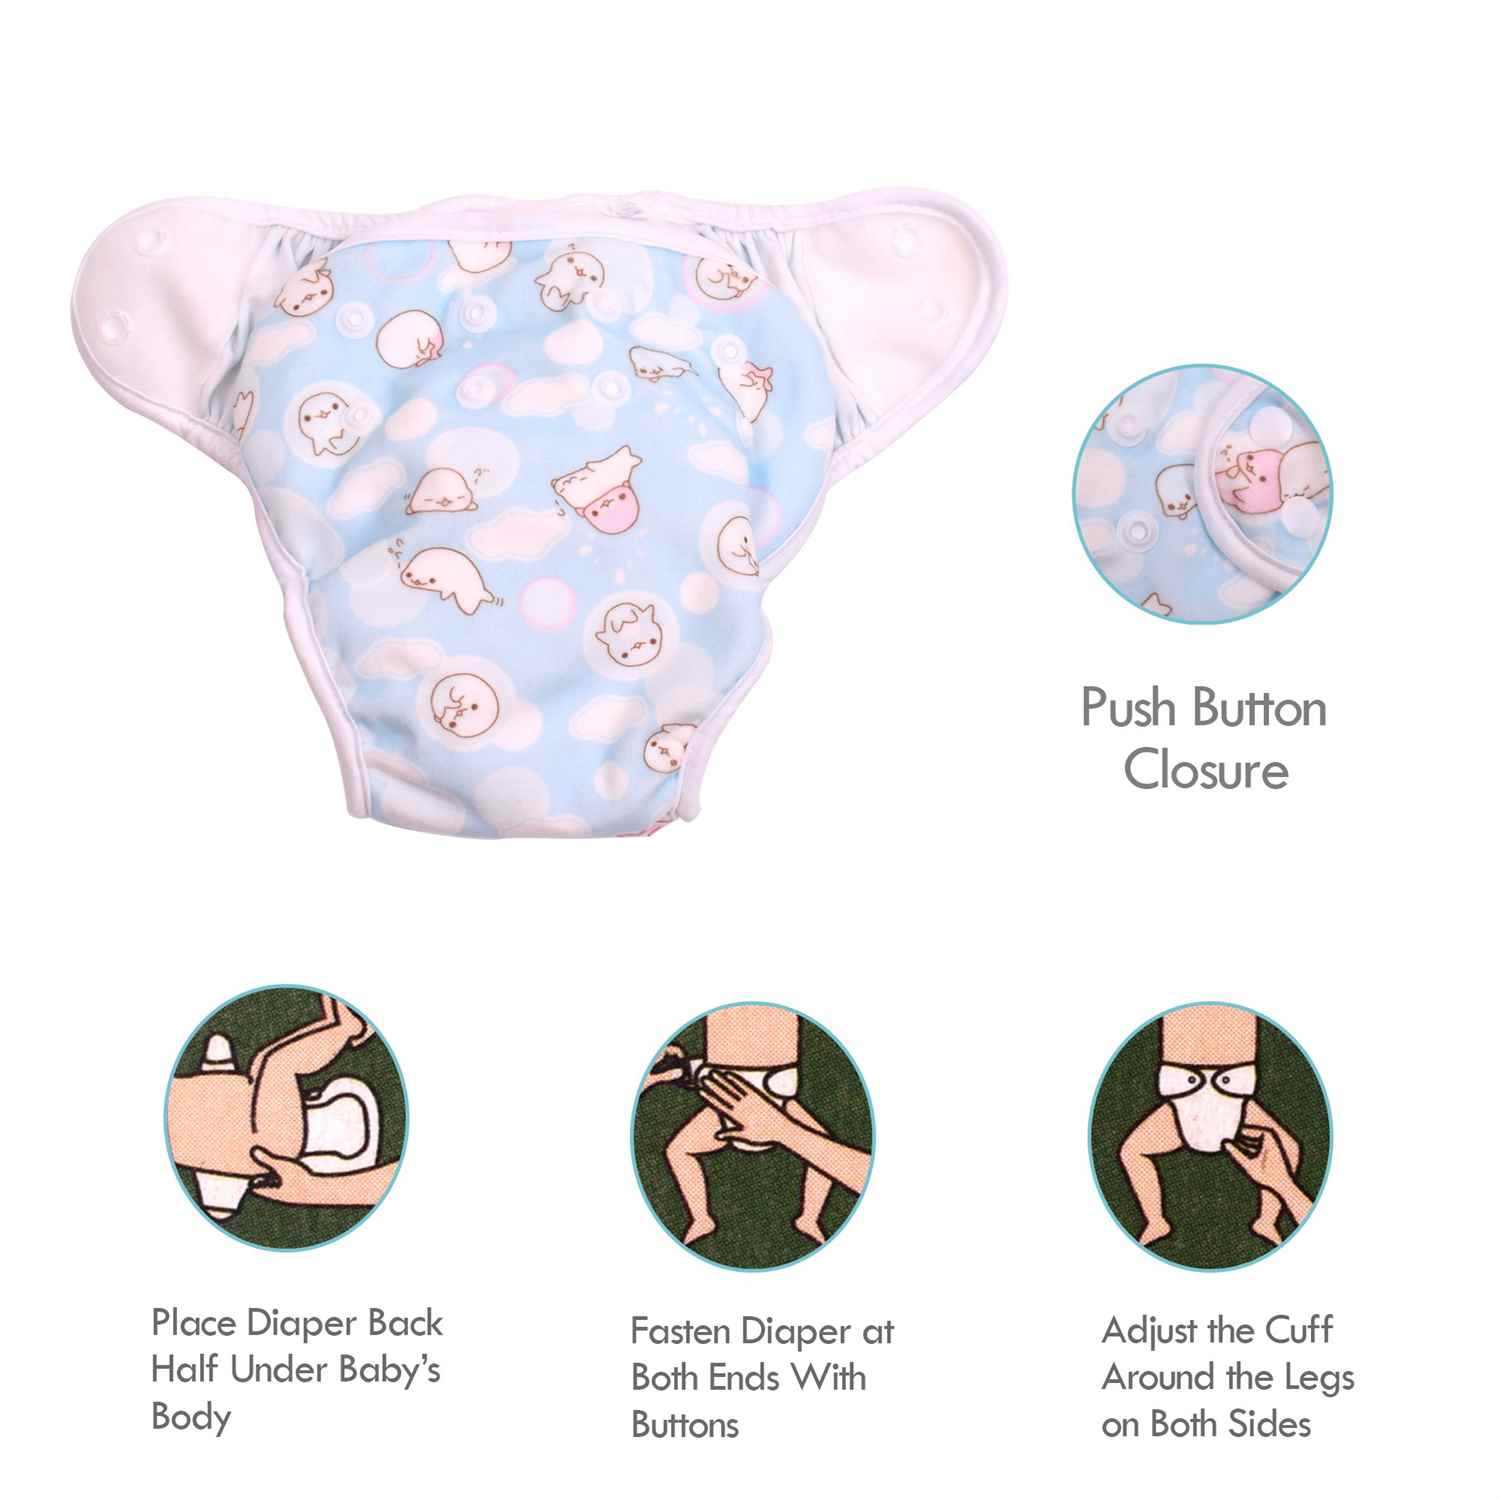 PAW PAW Baby Reusable Fabric Diaper with Pad, Size L (8-12kg)-Blue